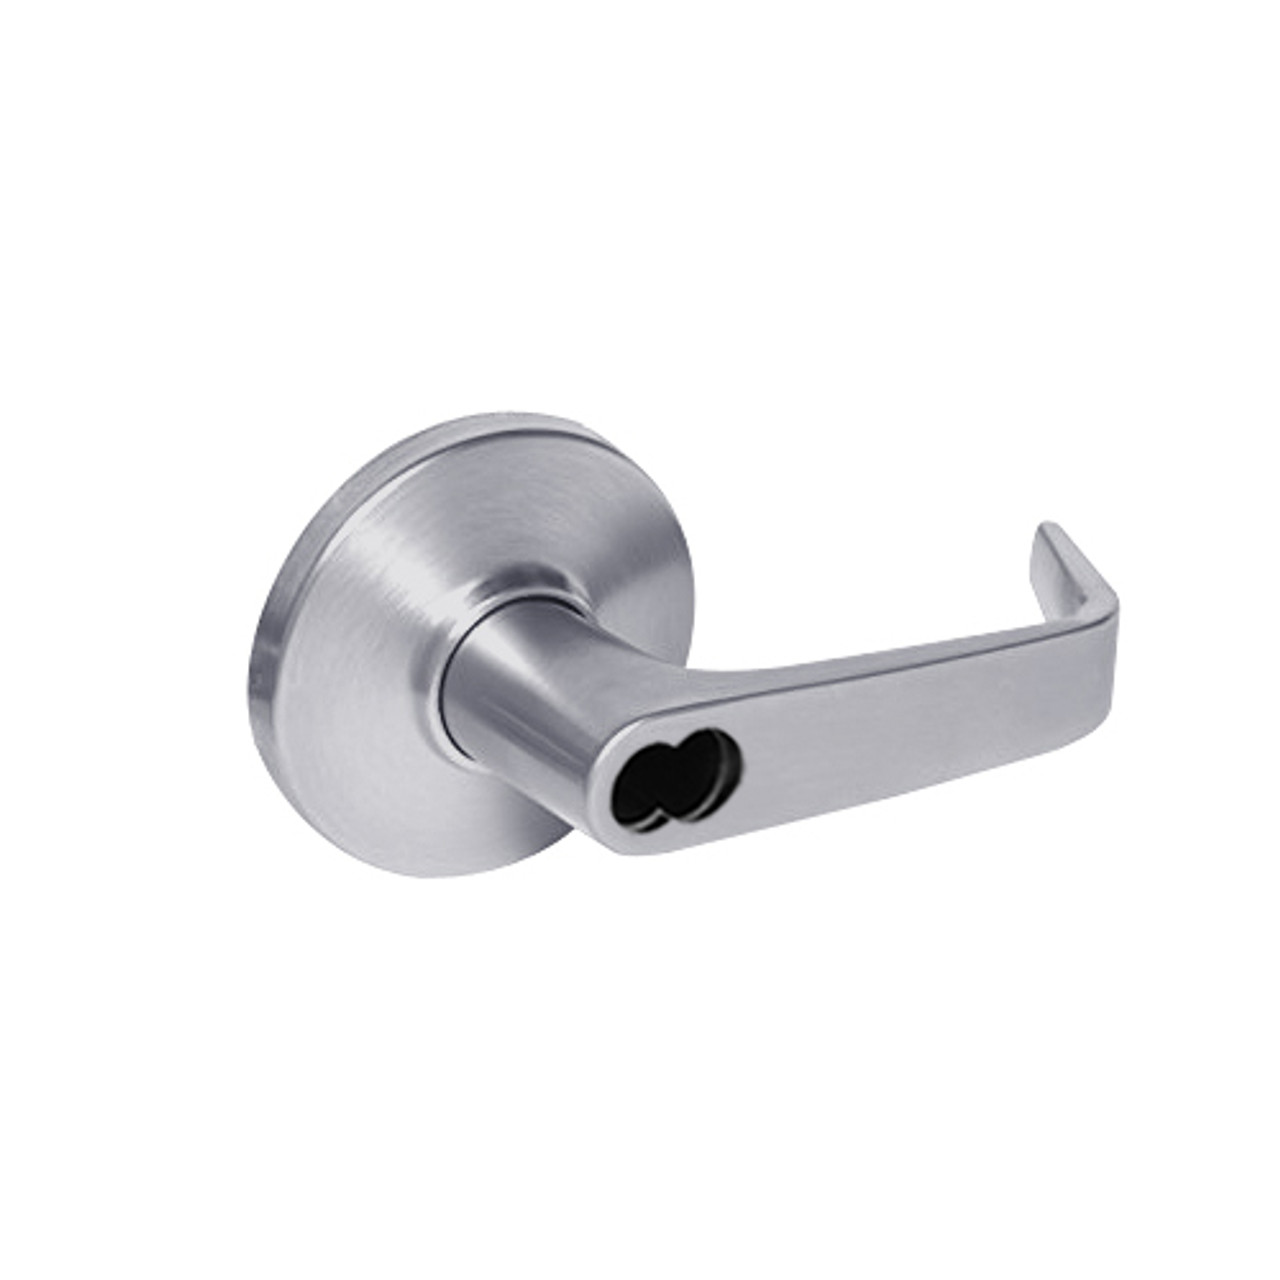 9K37H15DS3626 Best 9K Series Hotel Cylindrical Lever Locks with Contour Angle with Return Lever Design Accept 7 Pin Best Core in Satin Chrome